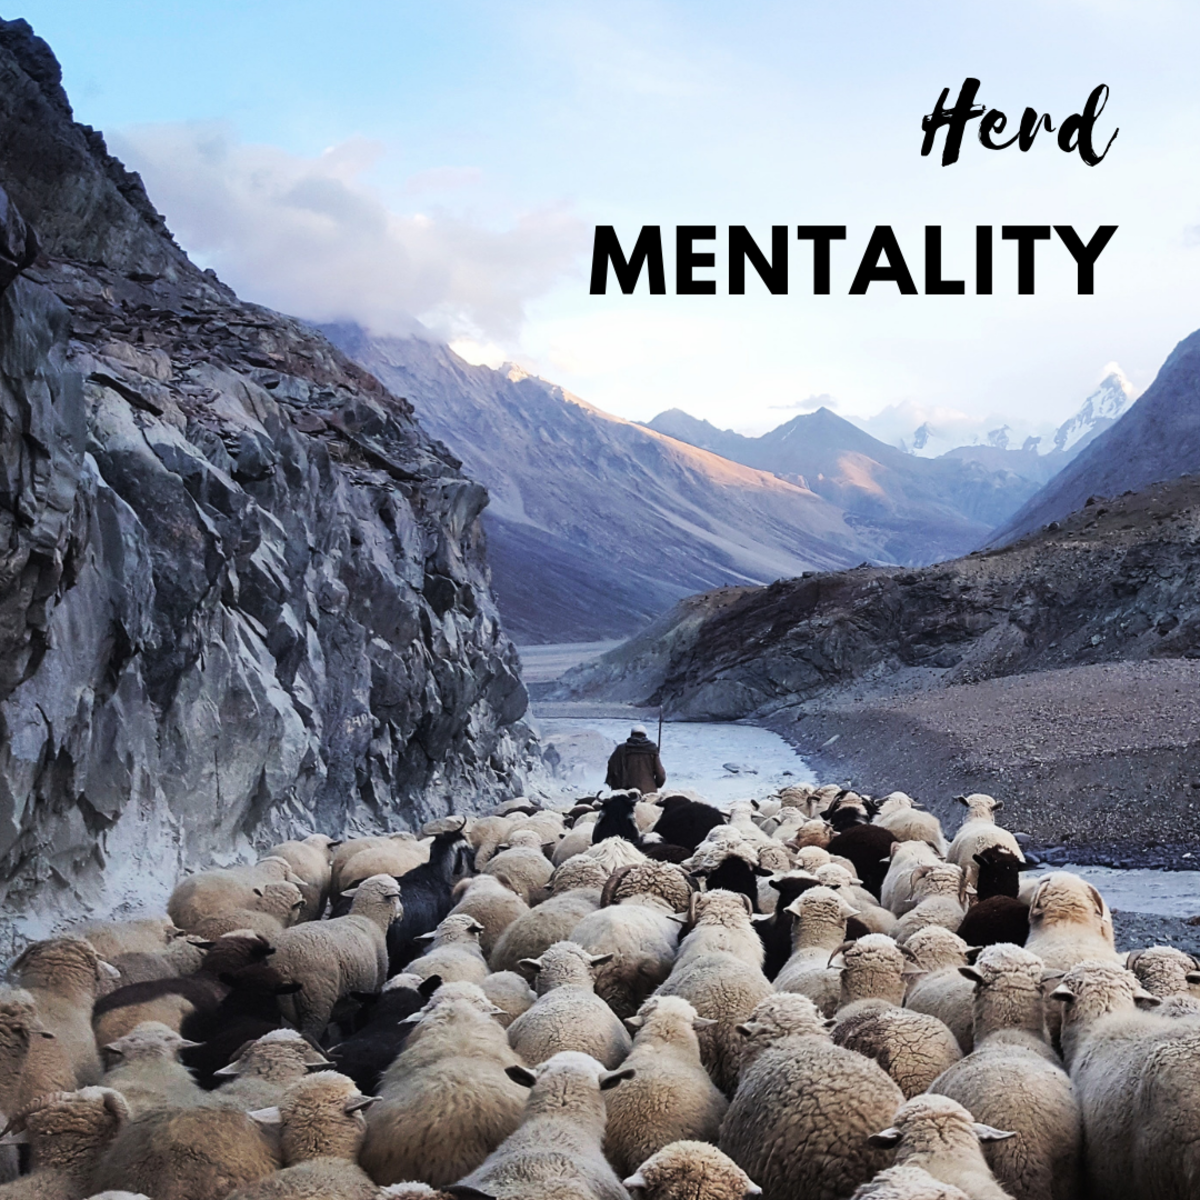 Information that will help you to understand and deal with herd mentality should you ever be faced with it.